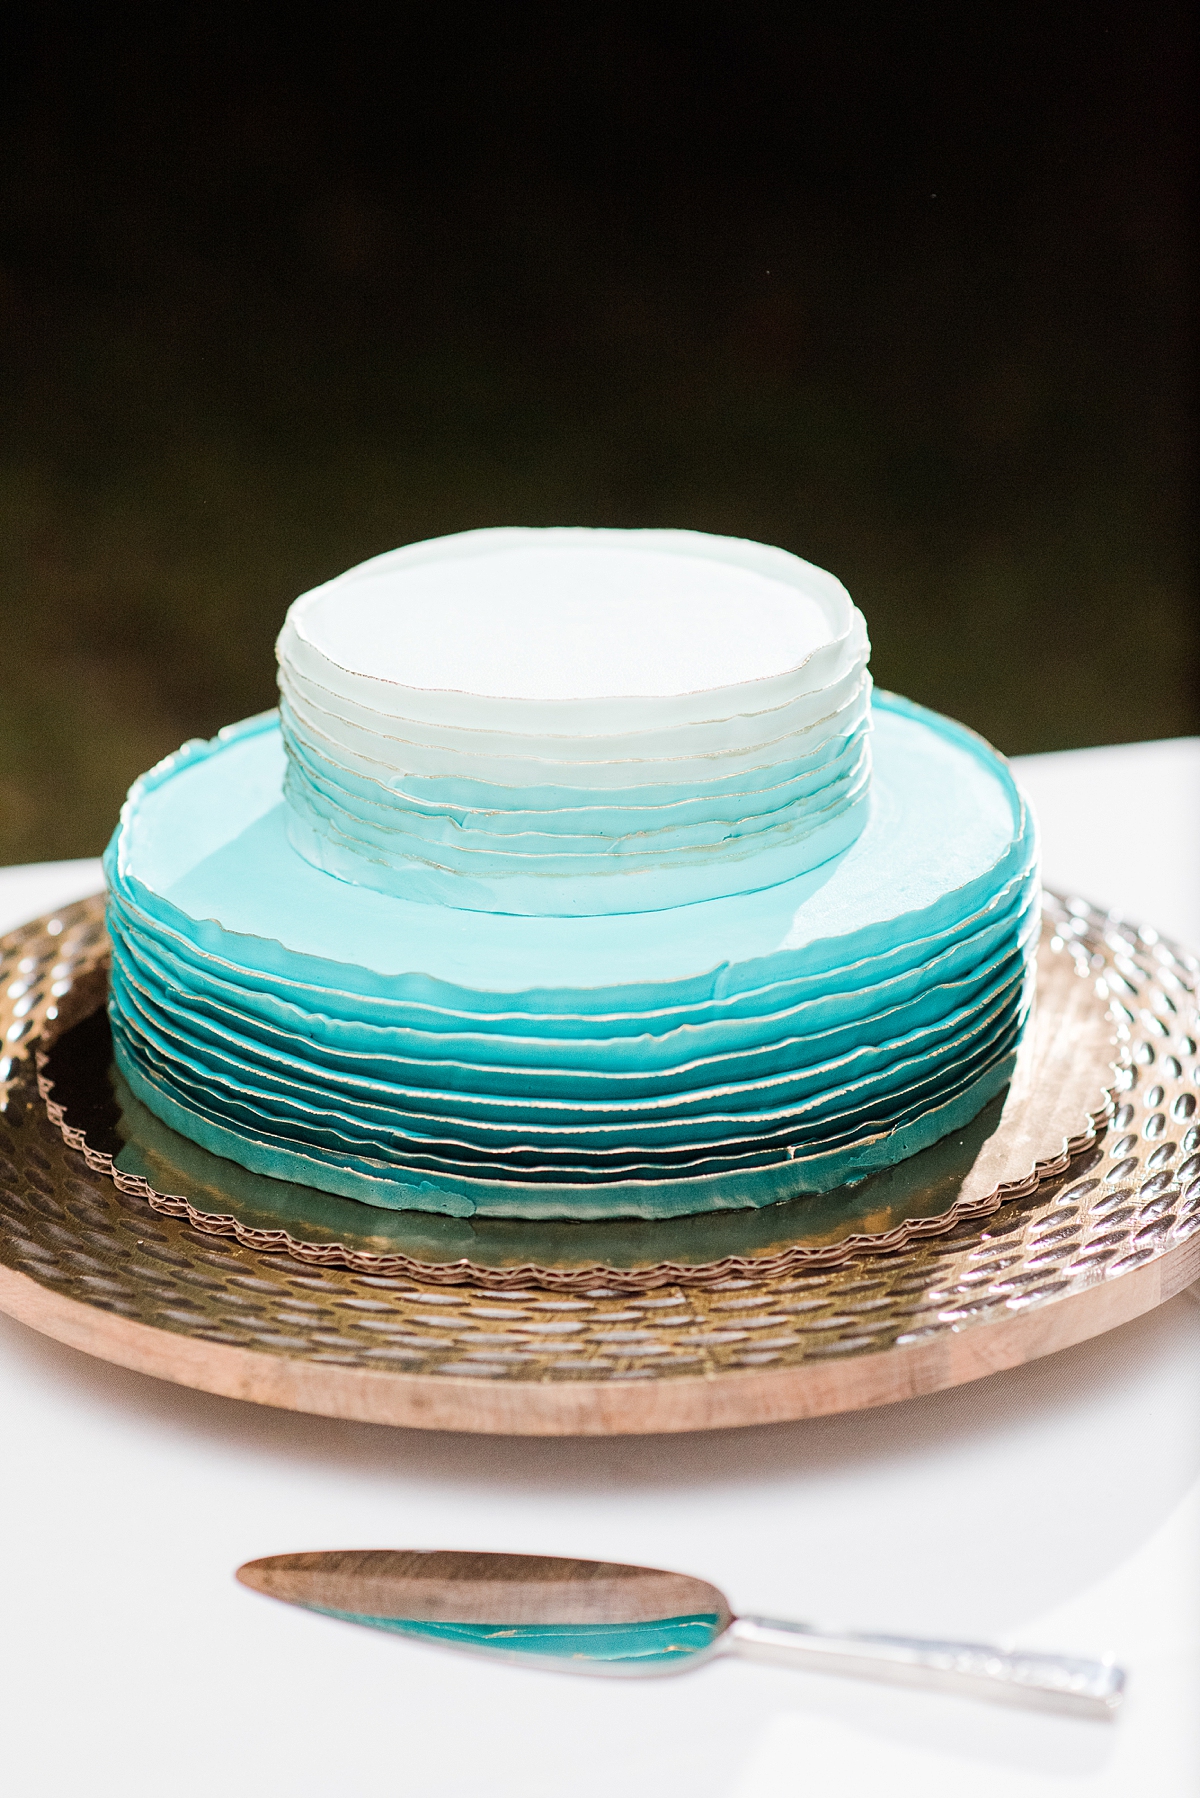 Stunning Blue and Teal Gold Leafed Wedding Cake at Fall Lake Front Wedding Reception. Wedding Photography by Yorktown Wedding Photographer Kailey Brianne Photography. 